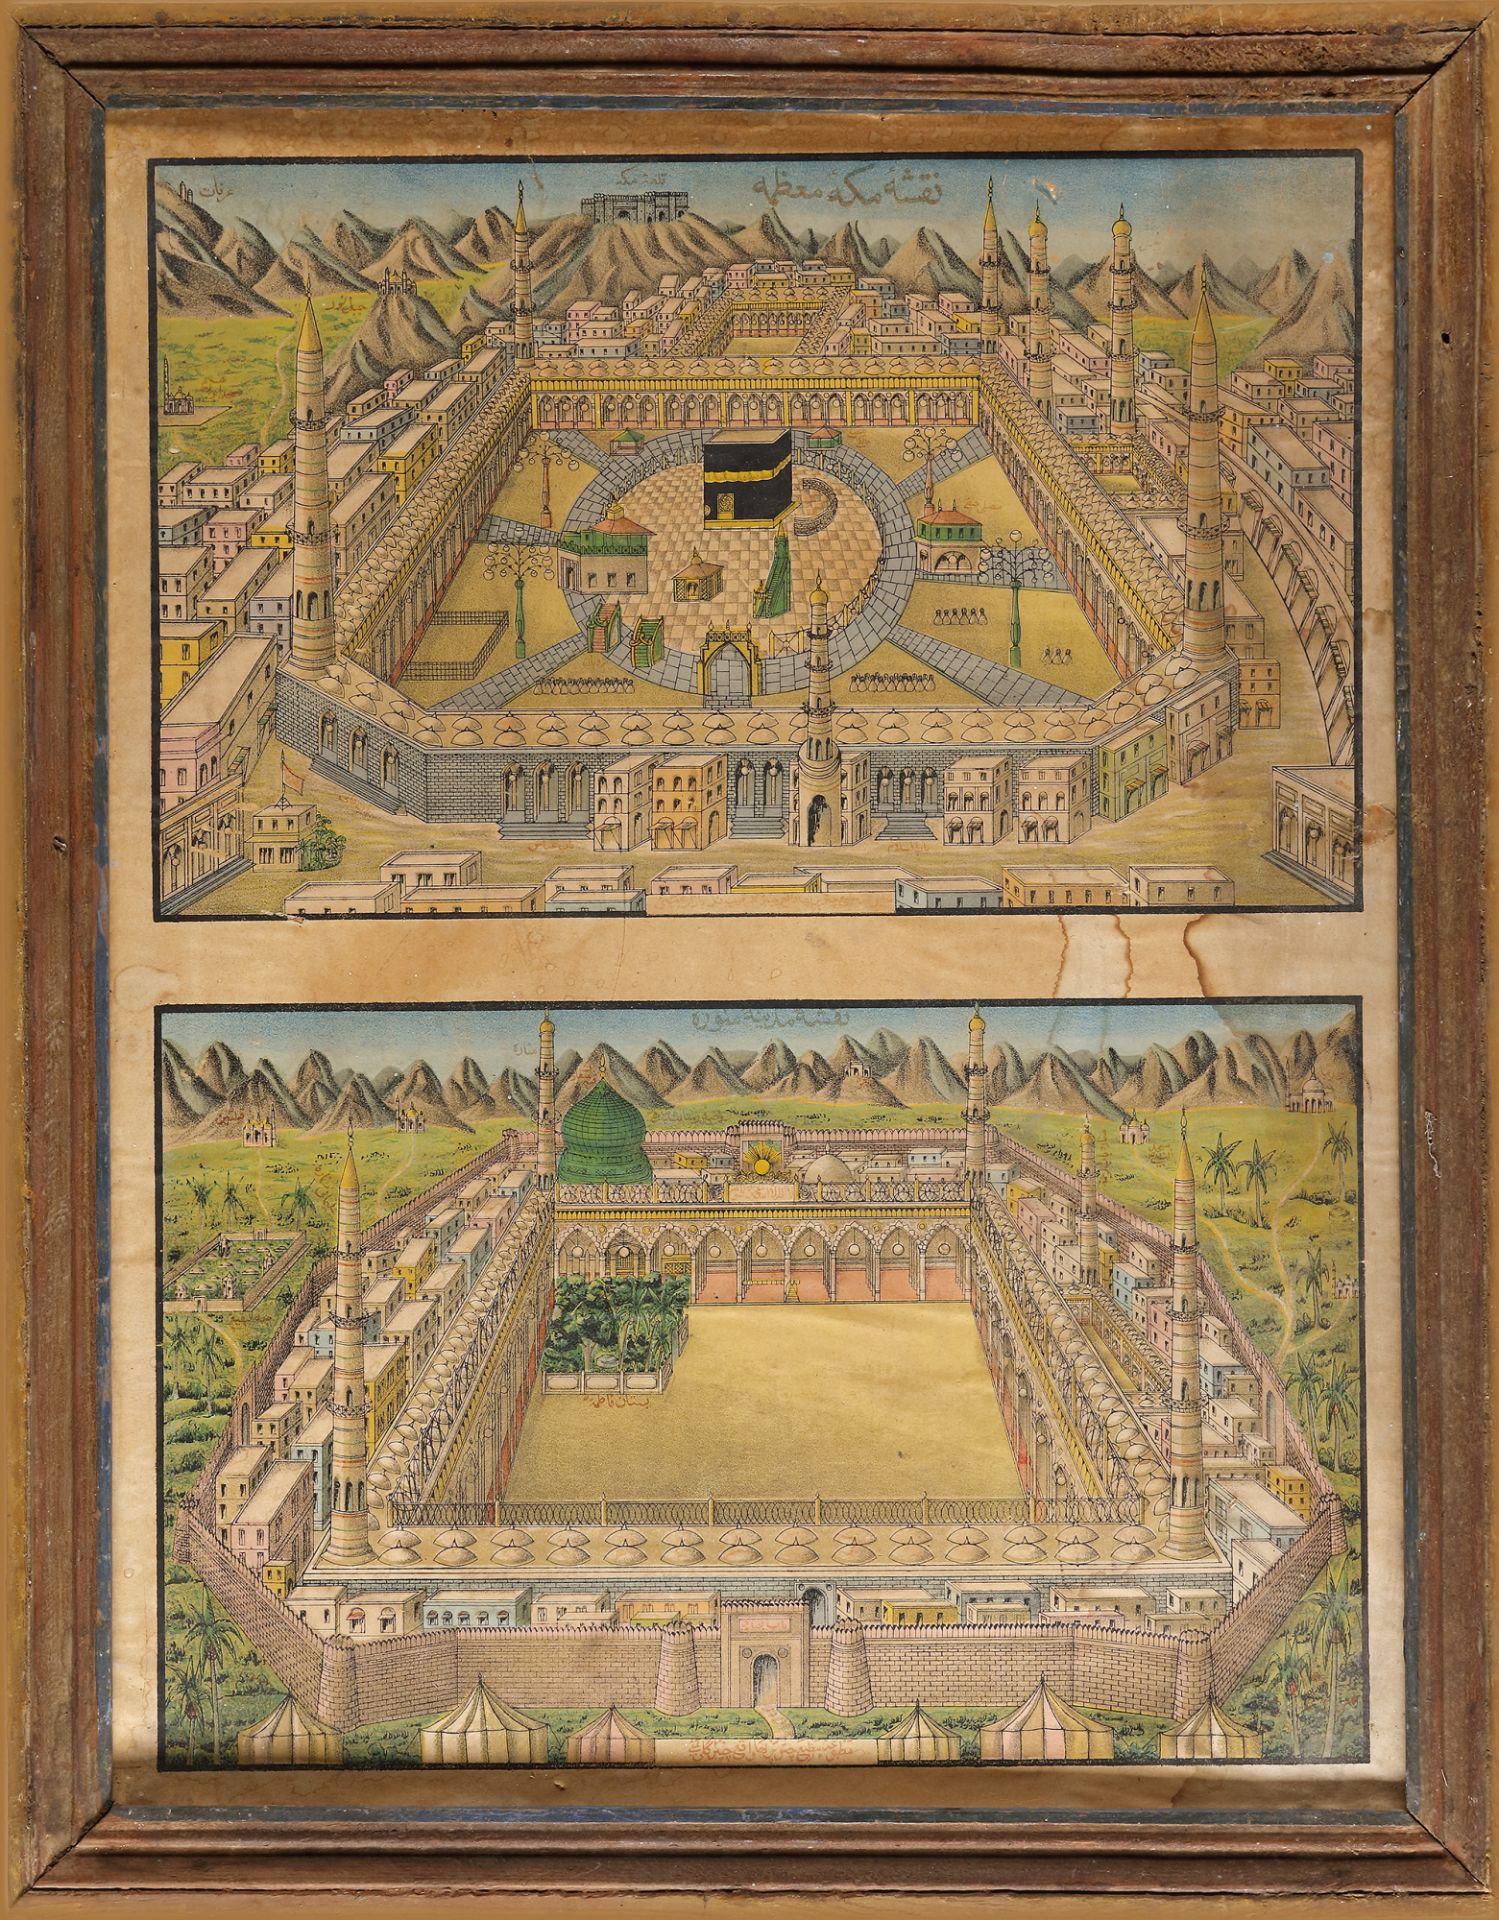 TWO COLORED PRINTS ON PAPER OF MECCA AND MEDINA, OTTOMAN, CIRCA 1900